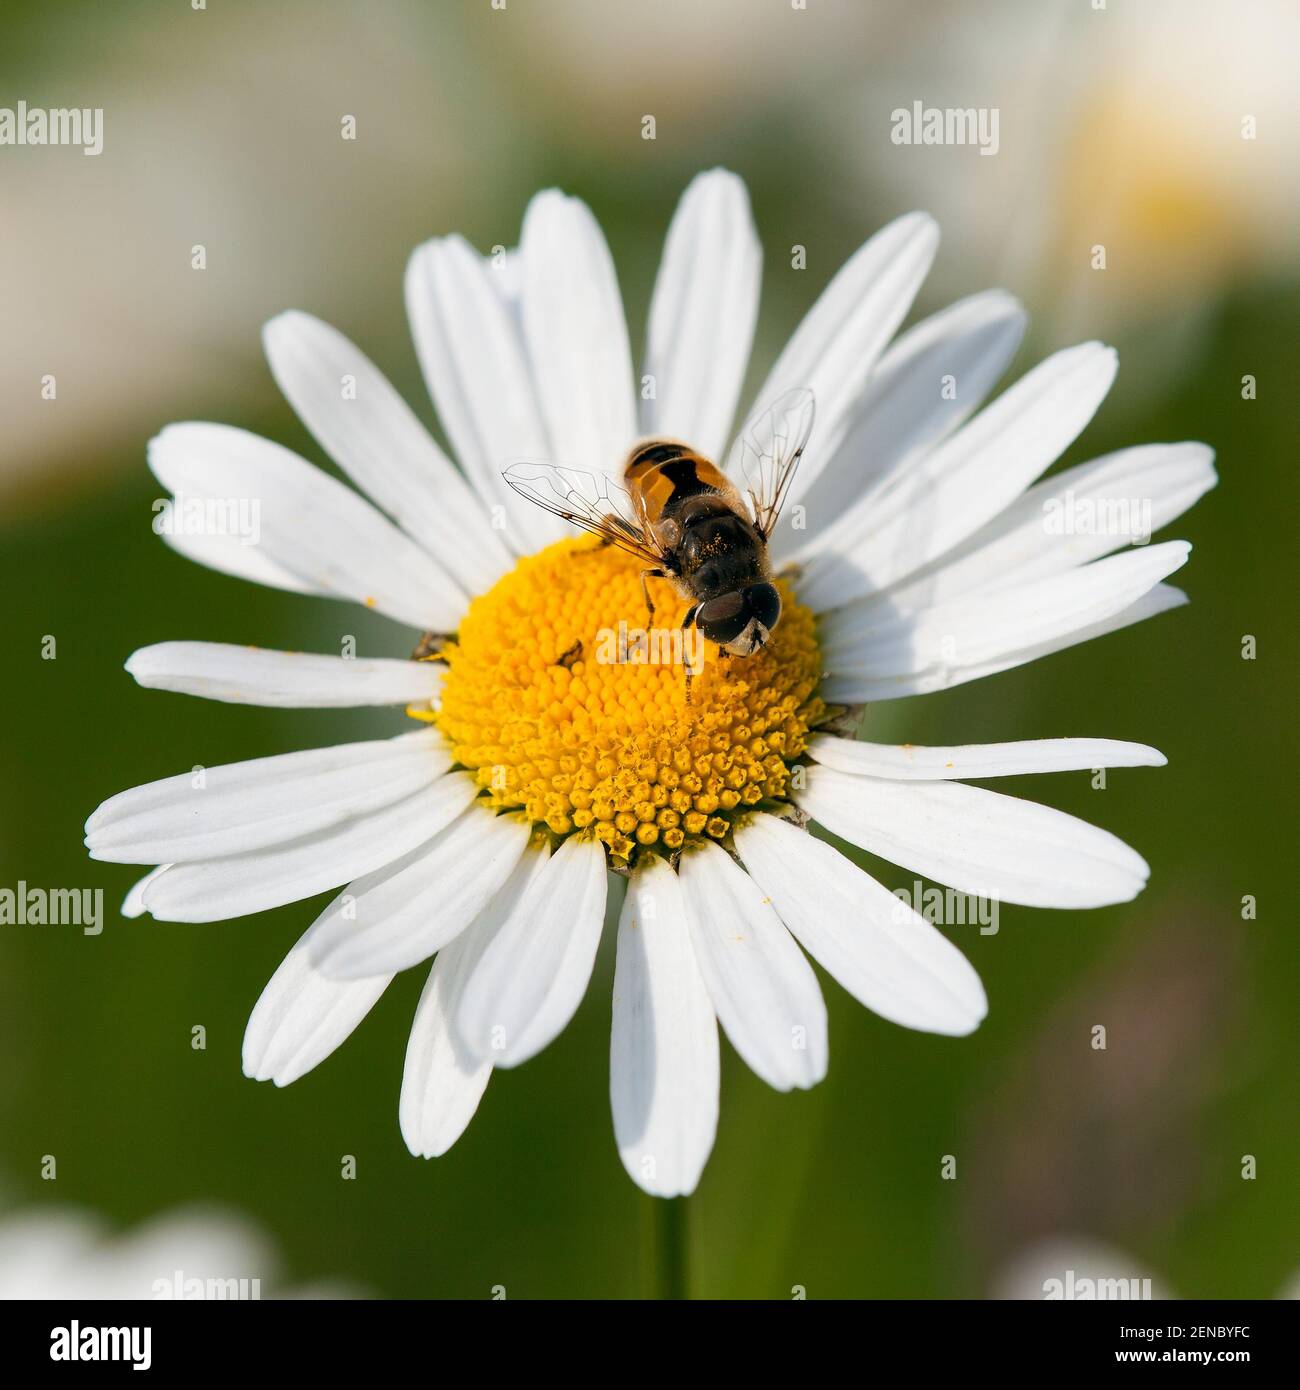 detail of fly sitting on white flower of common daisy Stock Photo